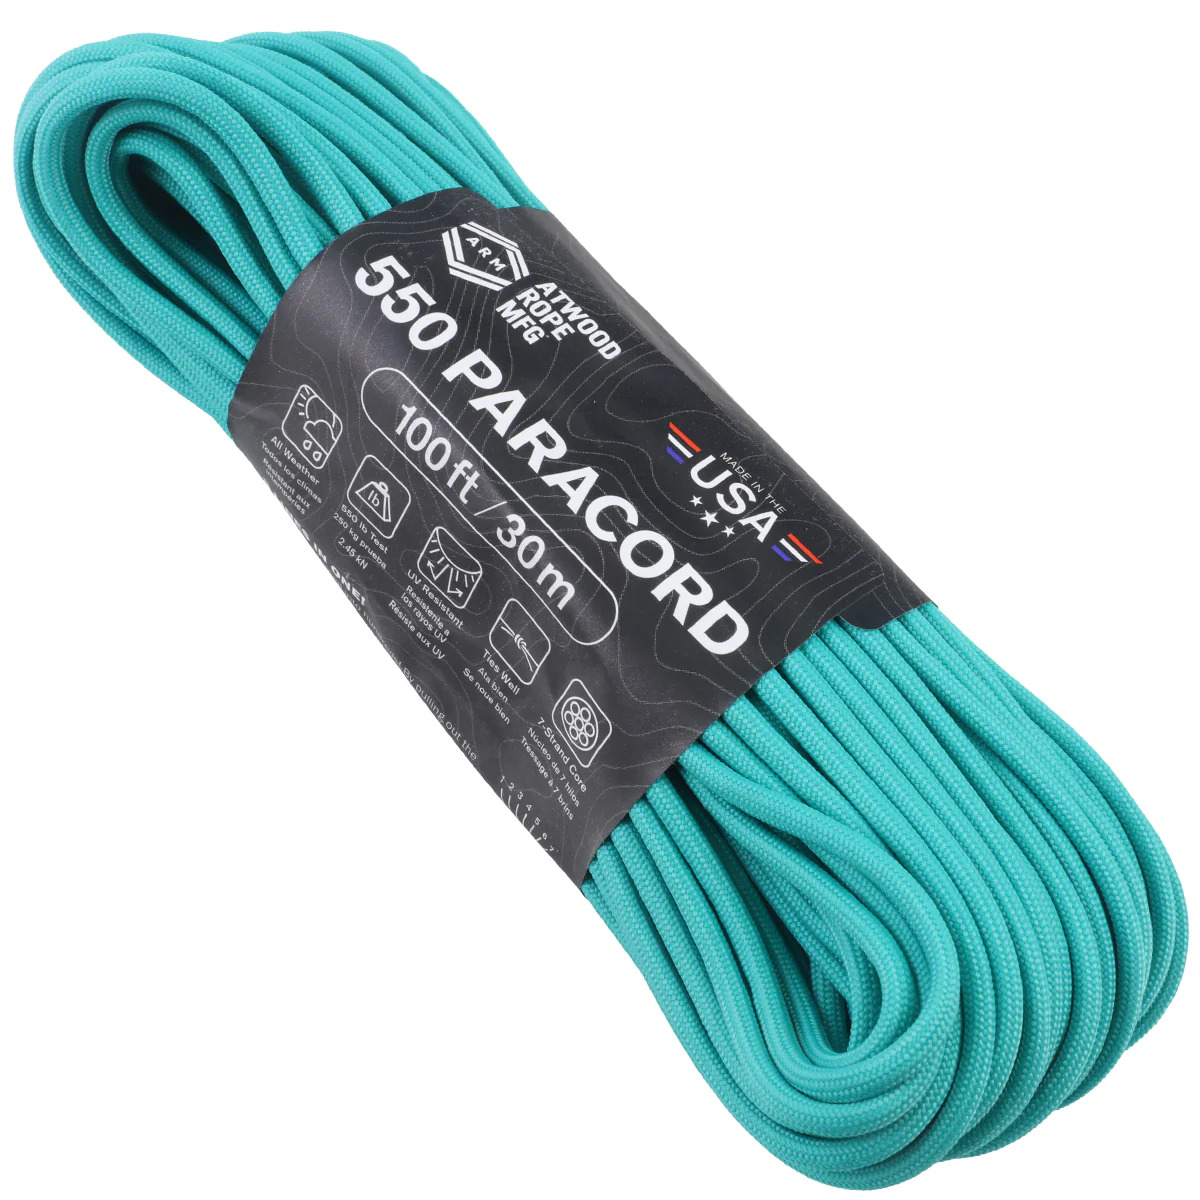 Paracord Liberty 550 7 strand (100ft) MADE IN USA